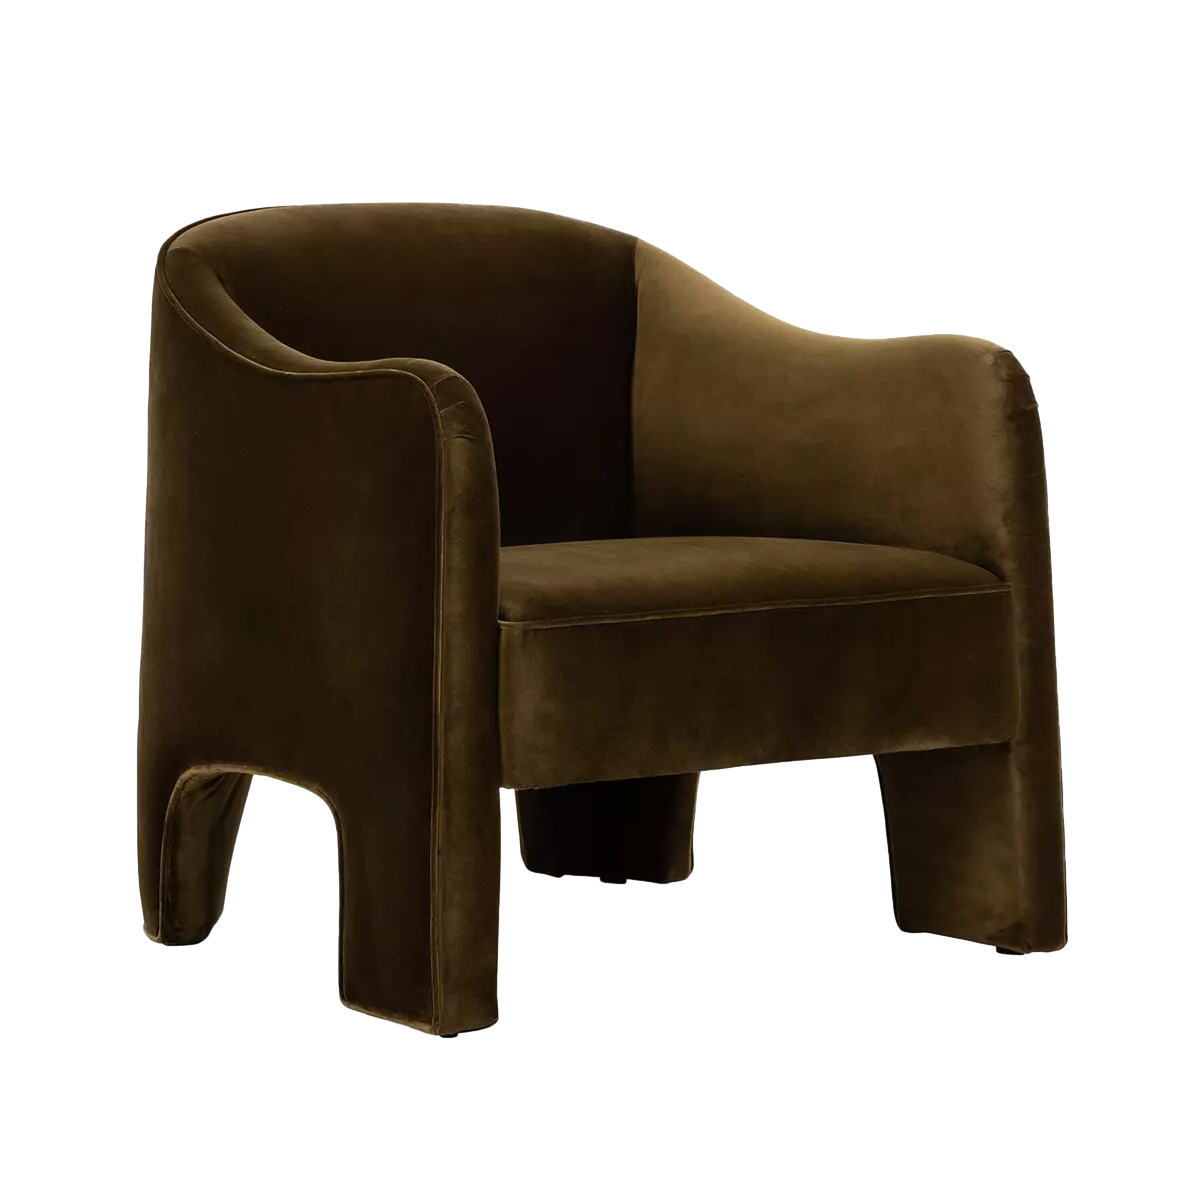 With eye-catching side cut outs, the Rhett Lounge Chair offers a soft minimalist look.